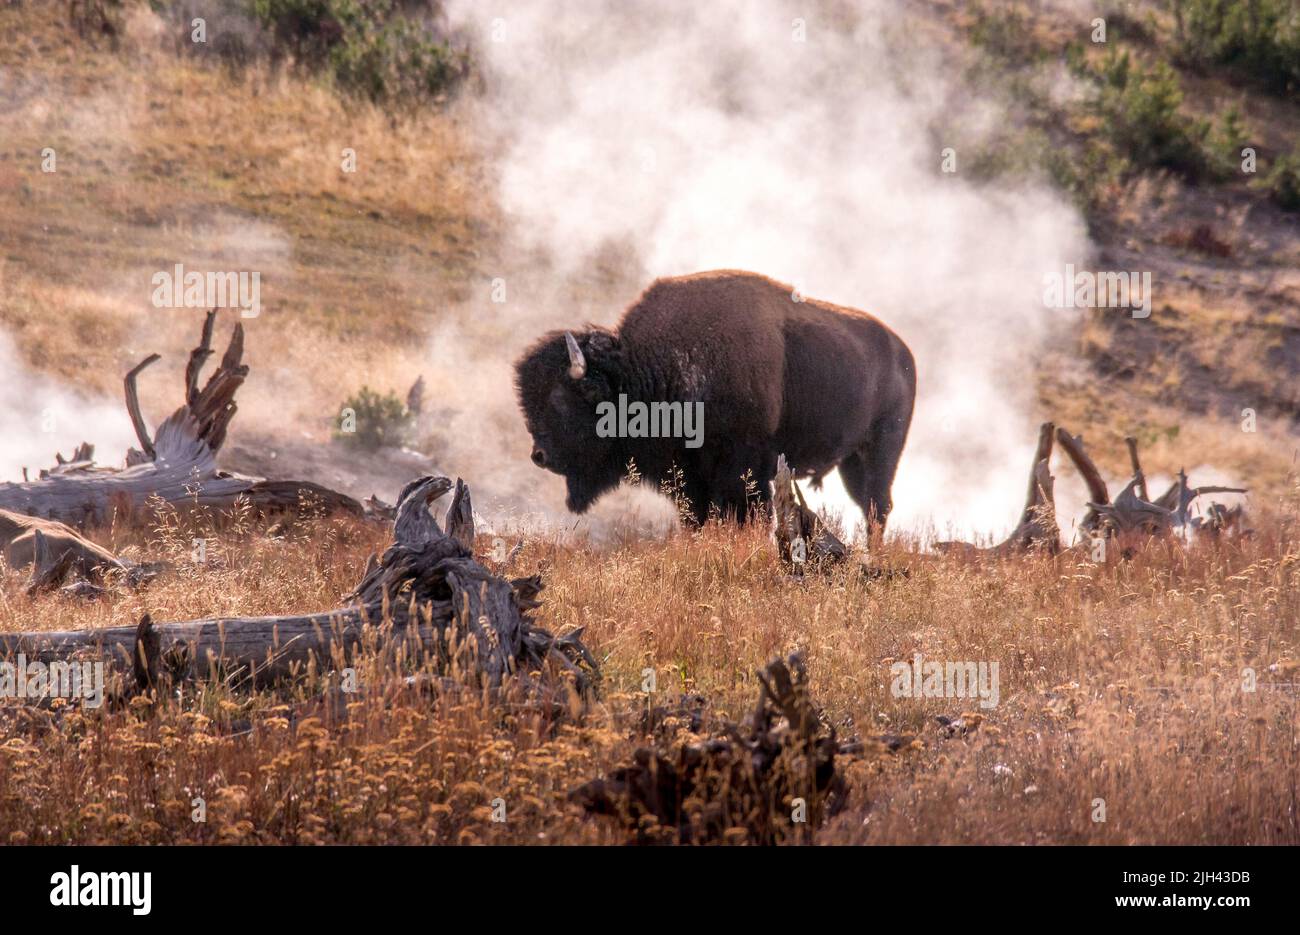 a Buffalo in Yellowstone stands in warm steam Stock Photo